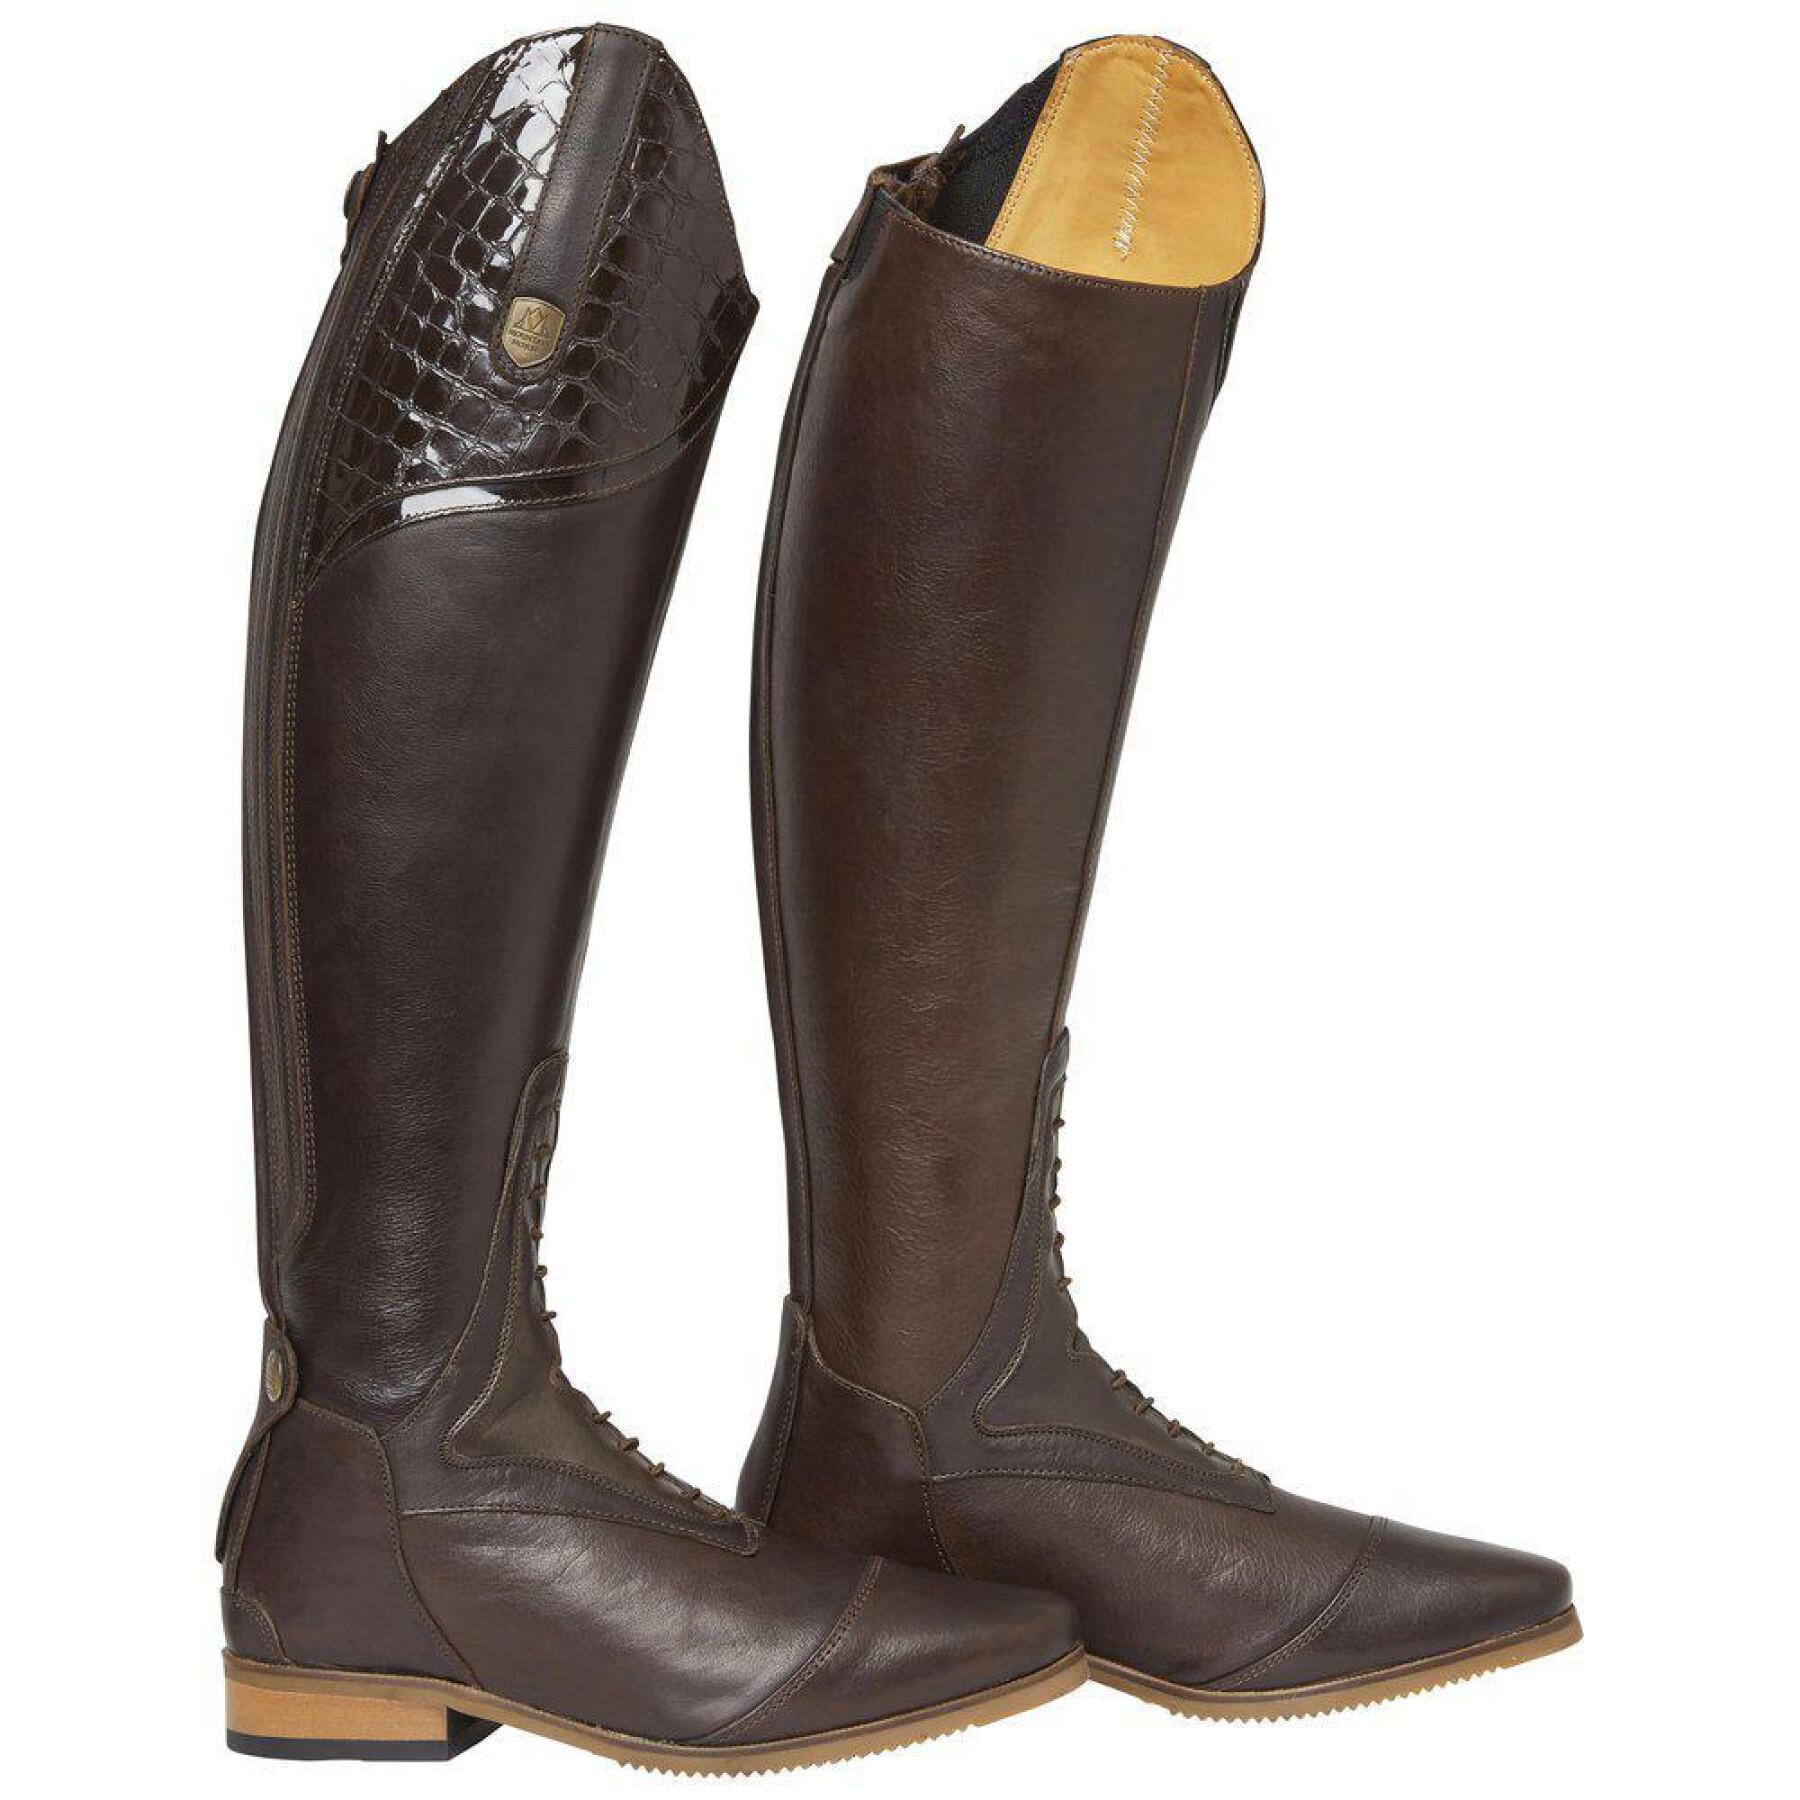 Women's leather riding boots Mountain Horse Sovereign Lux SR Short Regular